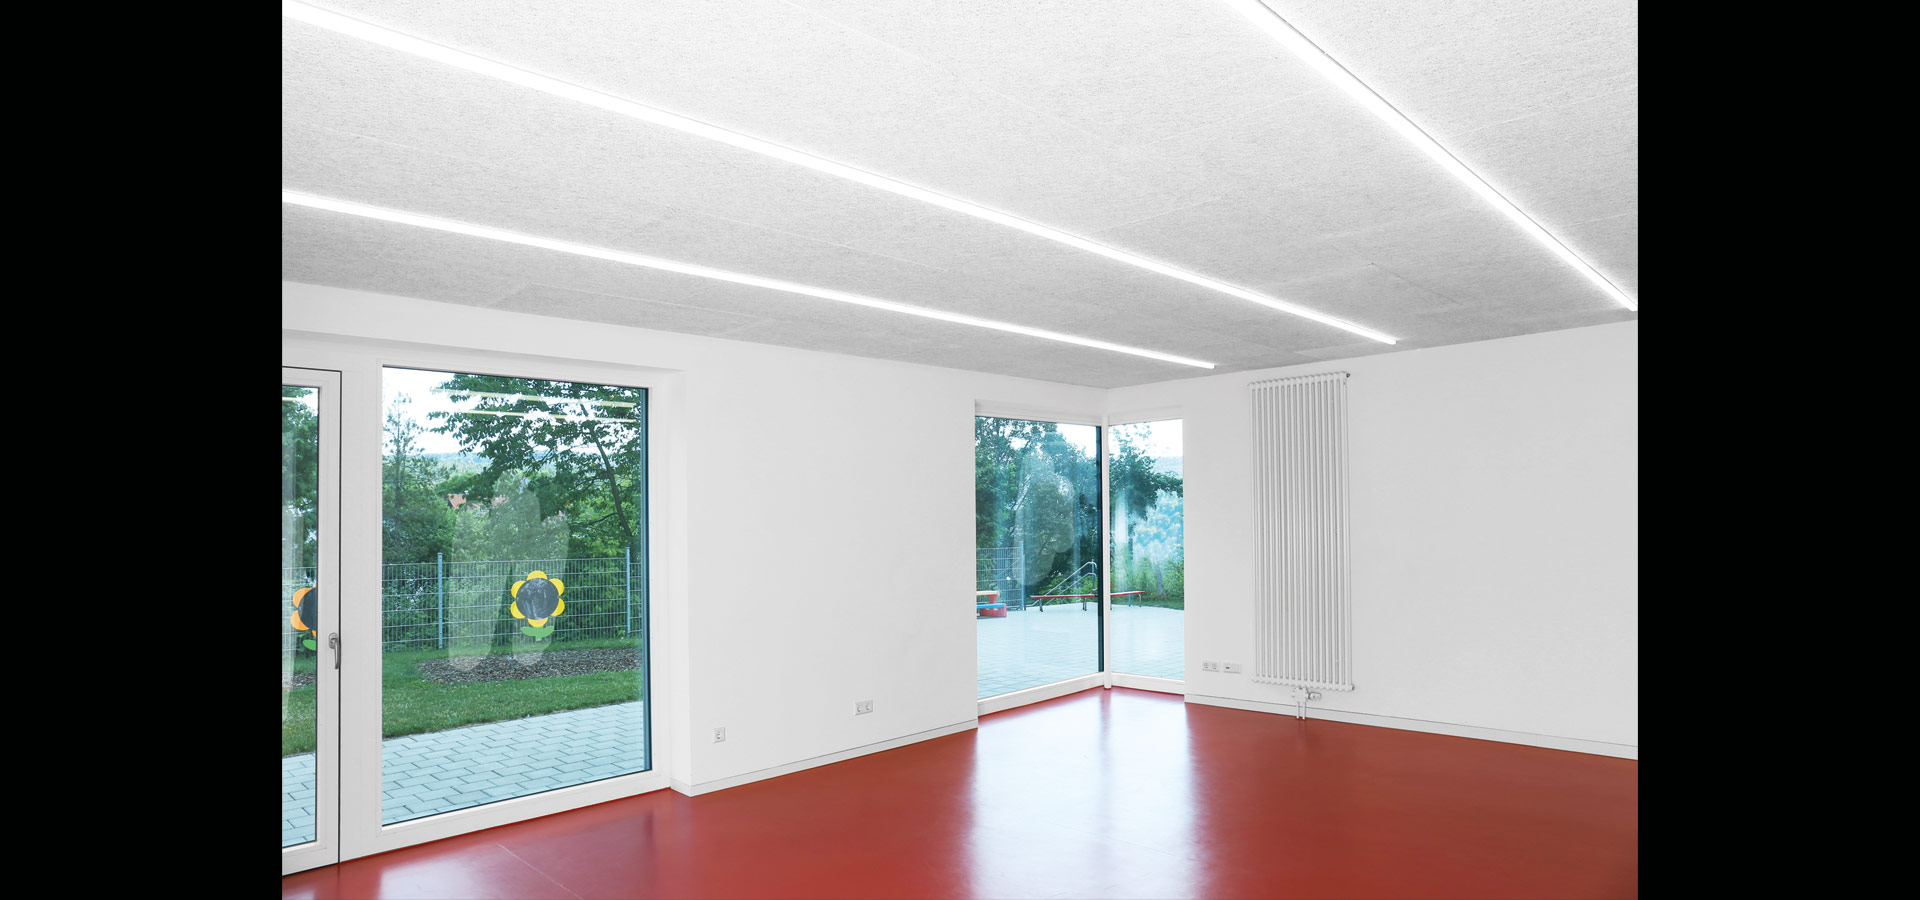 Luxsystem led luminaire architectural lighting lines of light community hall